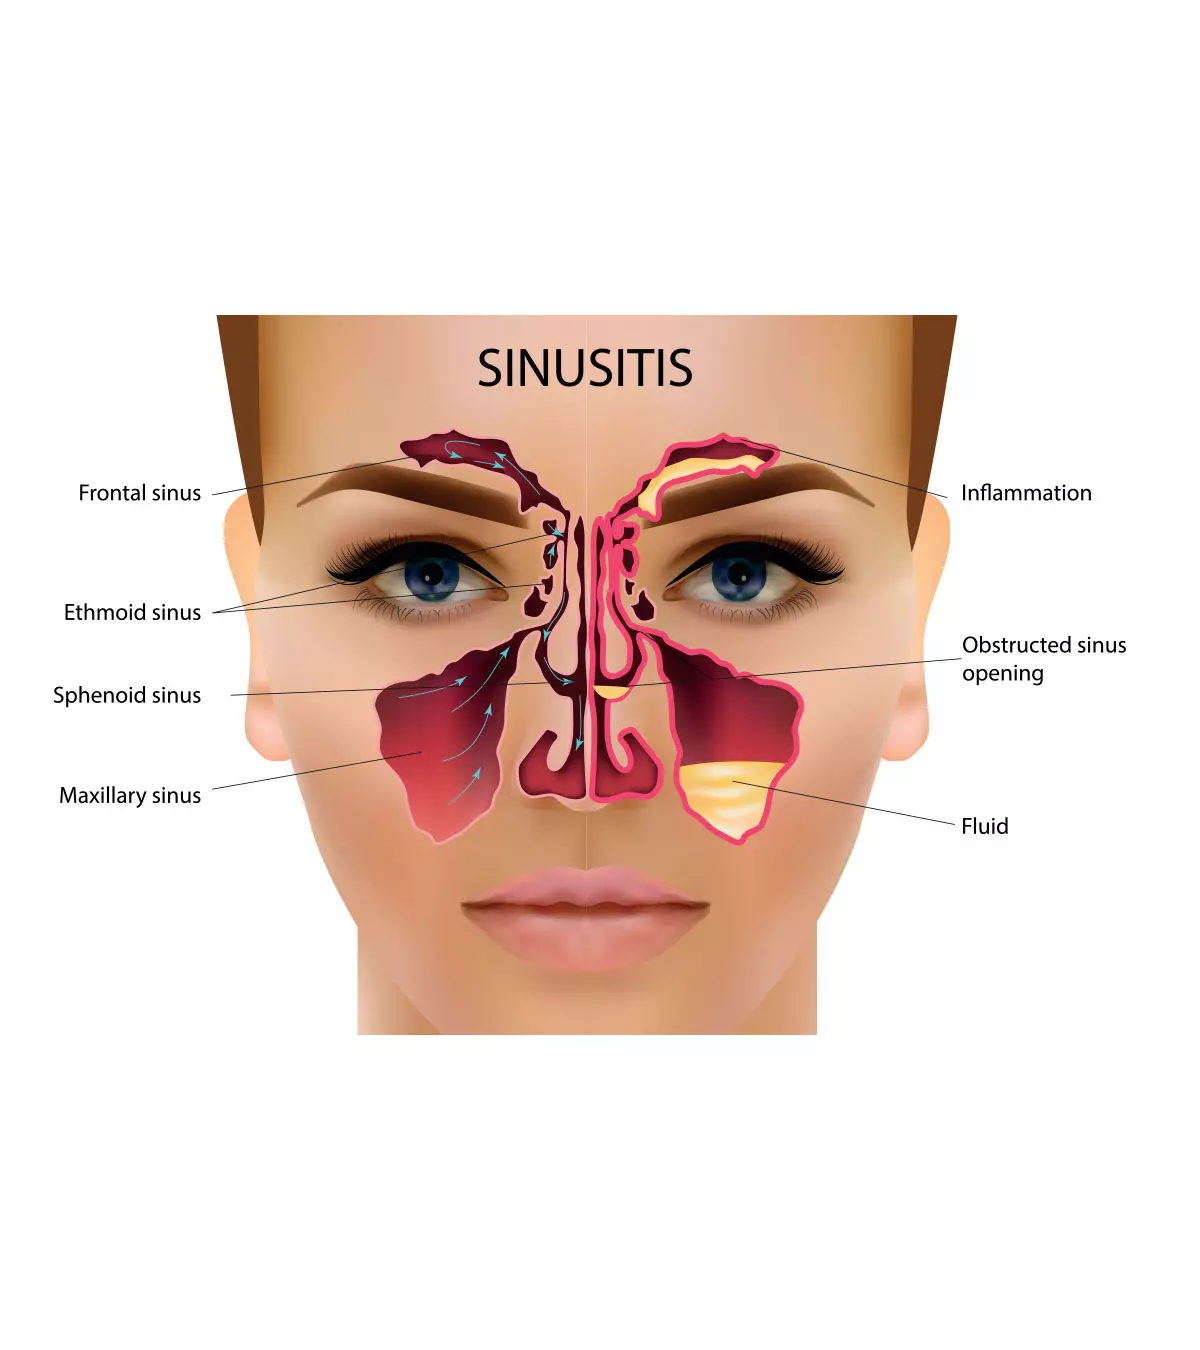 Sinus Infection When Breastfeeding: Treatment And Home Remedies